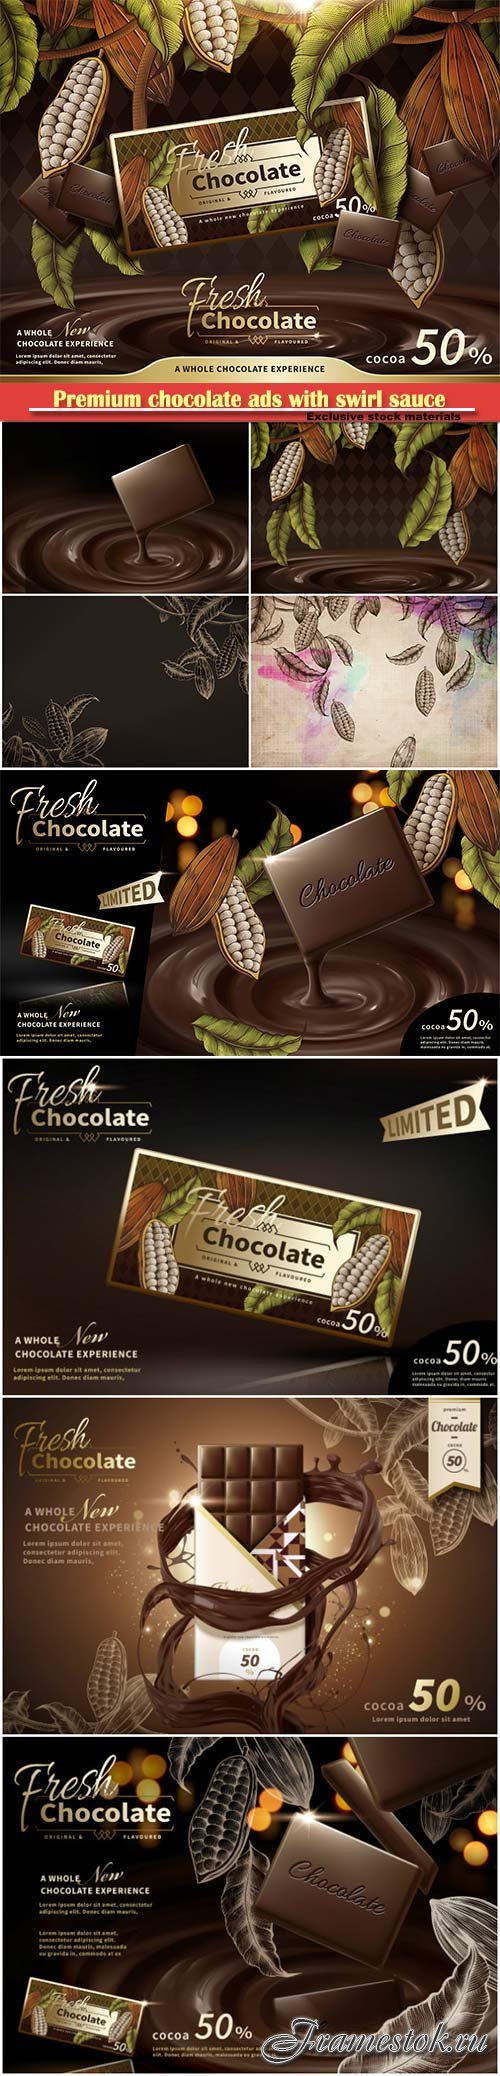 Premium chocolate ads with swirl sauce in 3d illustration, engraved cacao plants elements